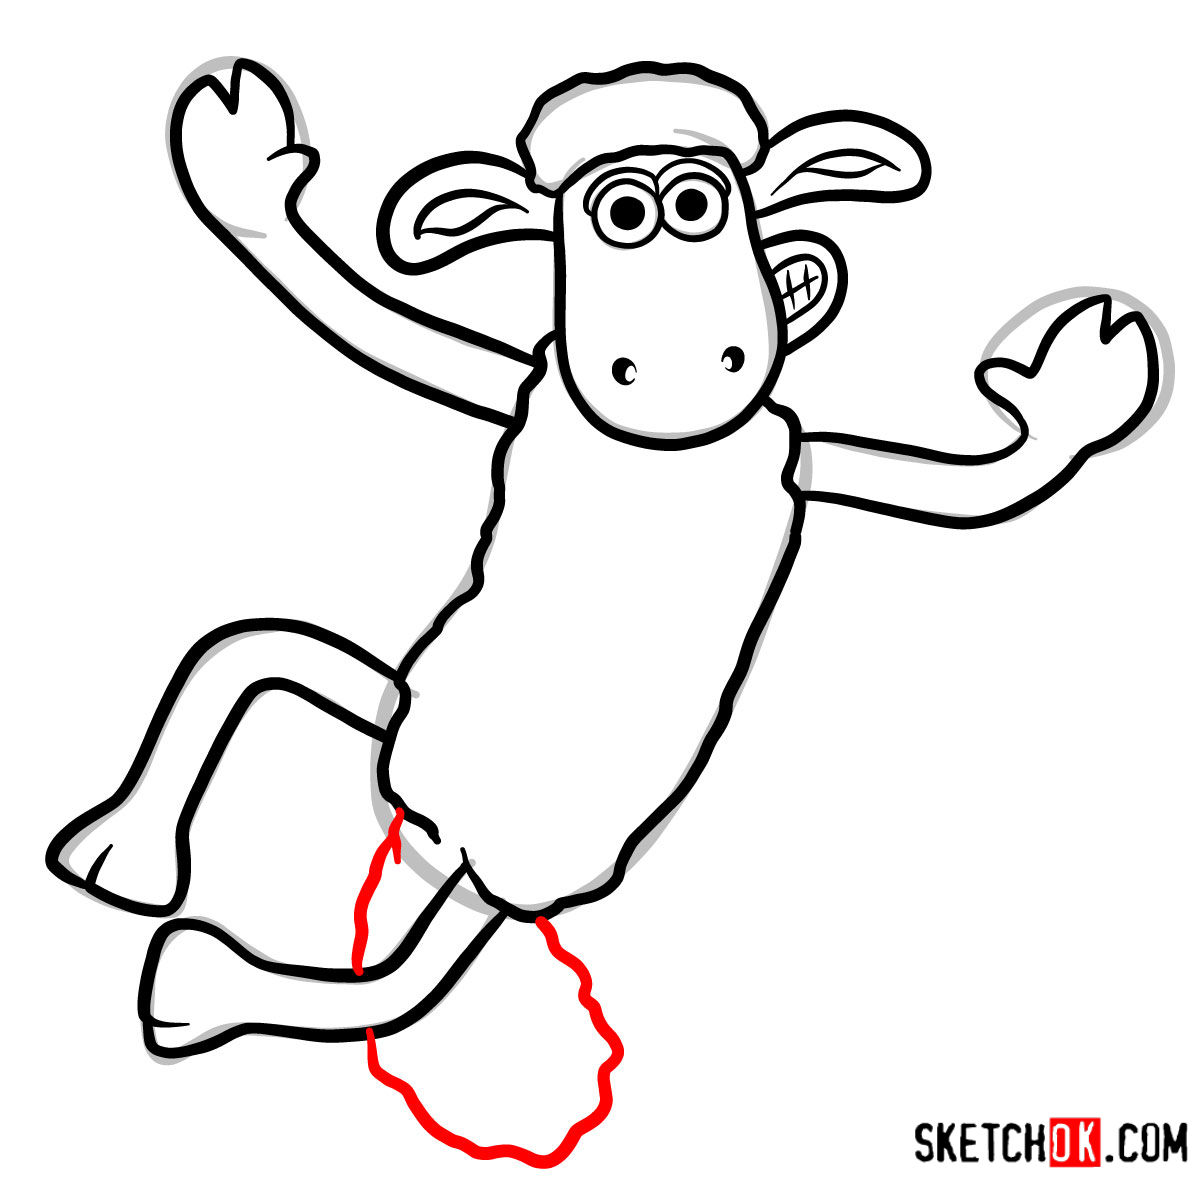 How to draw Shaun the Sheep - step 07